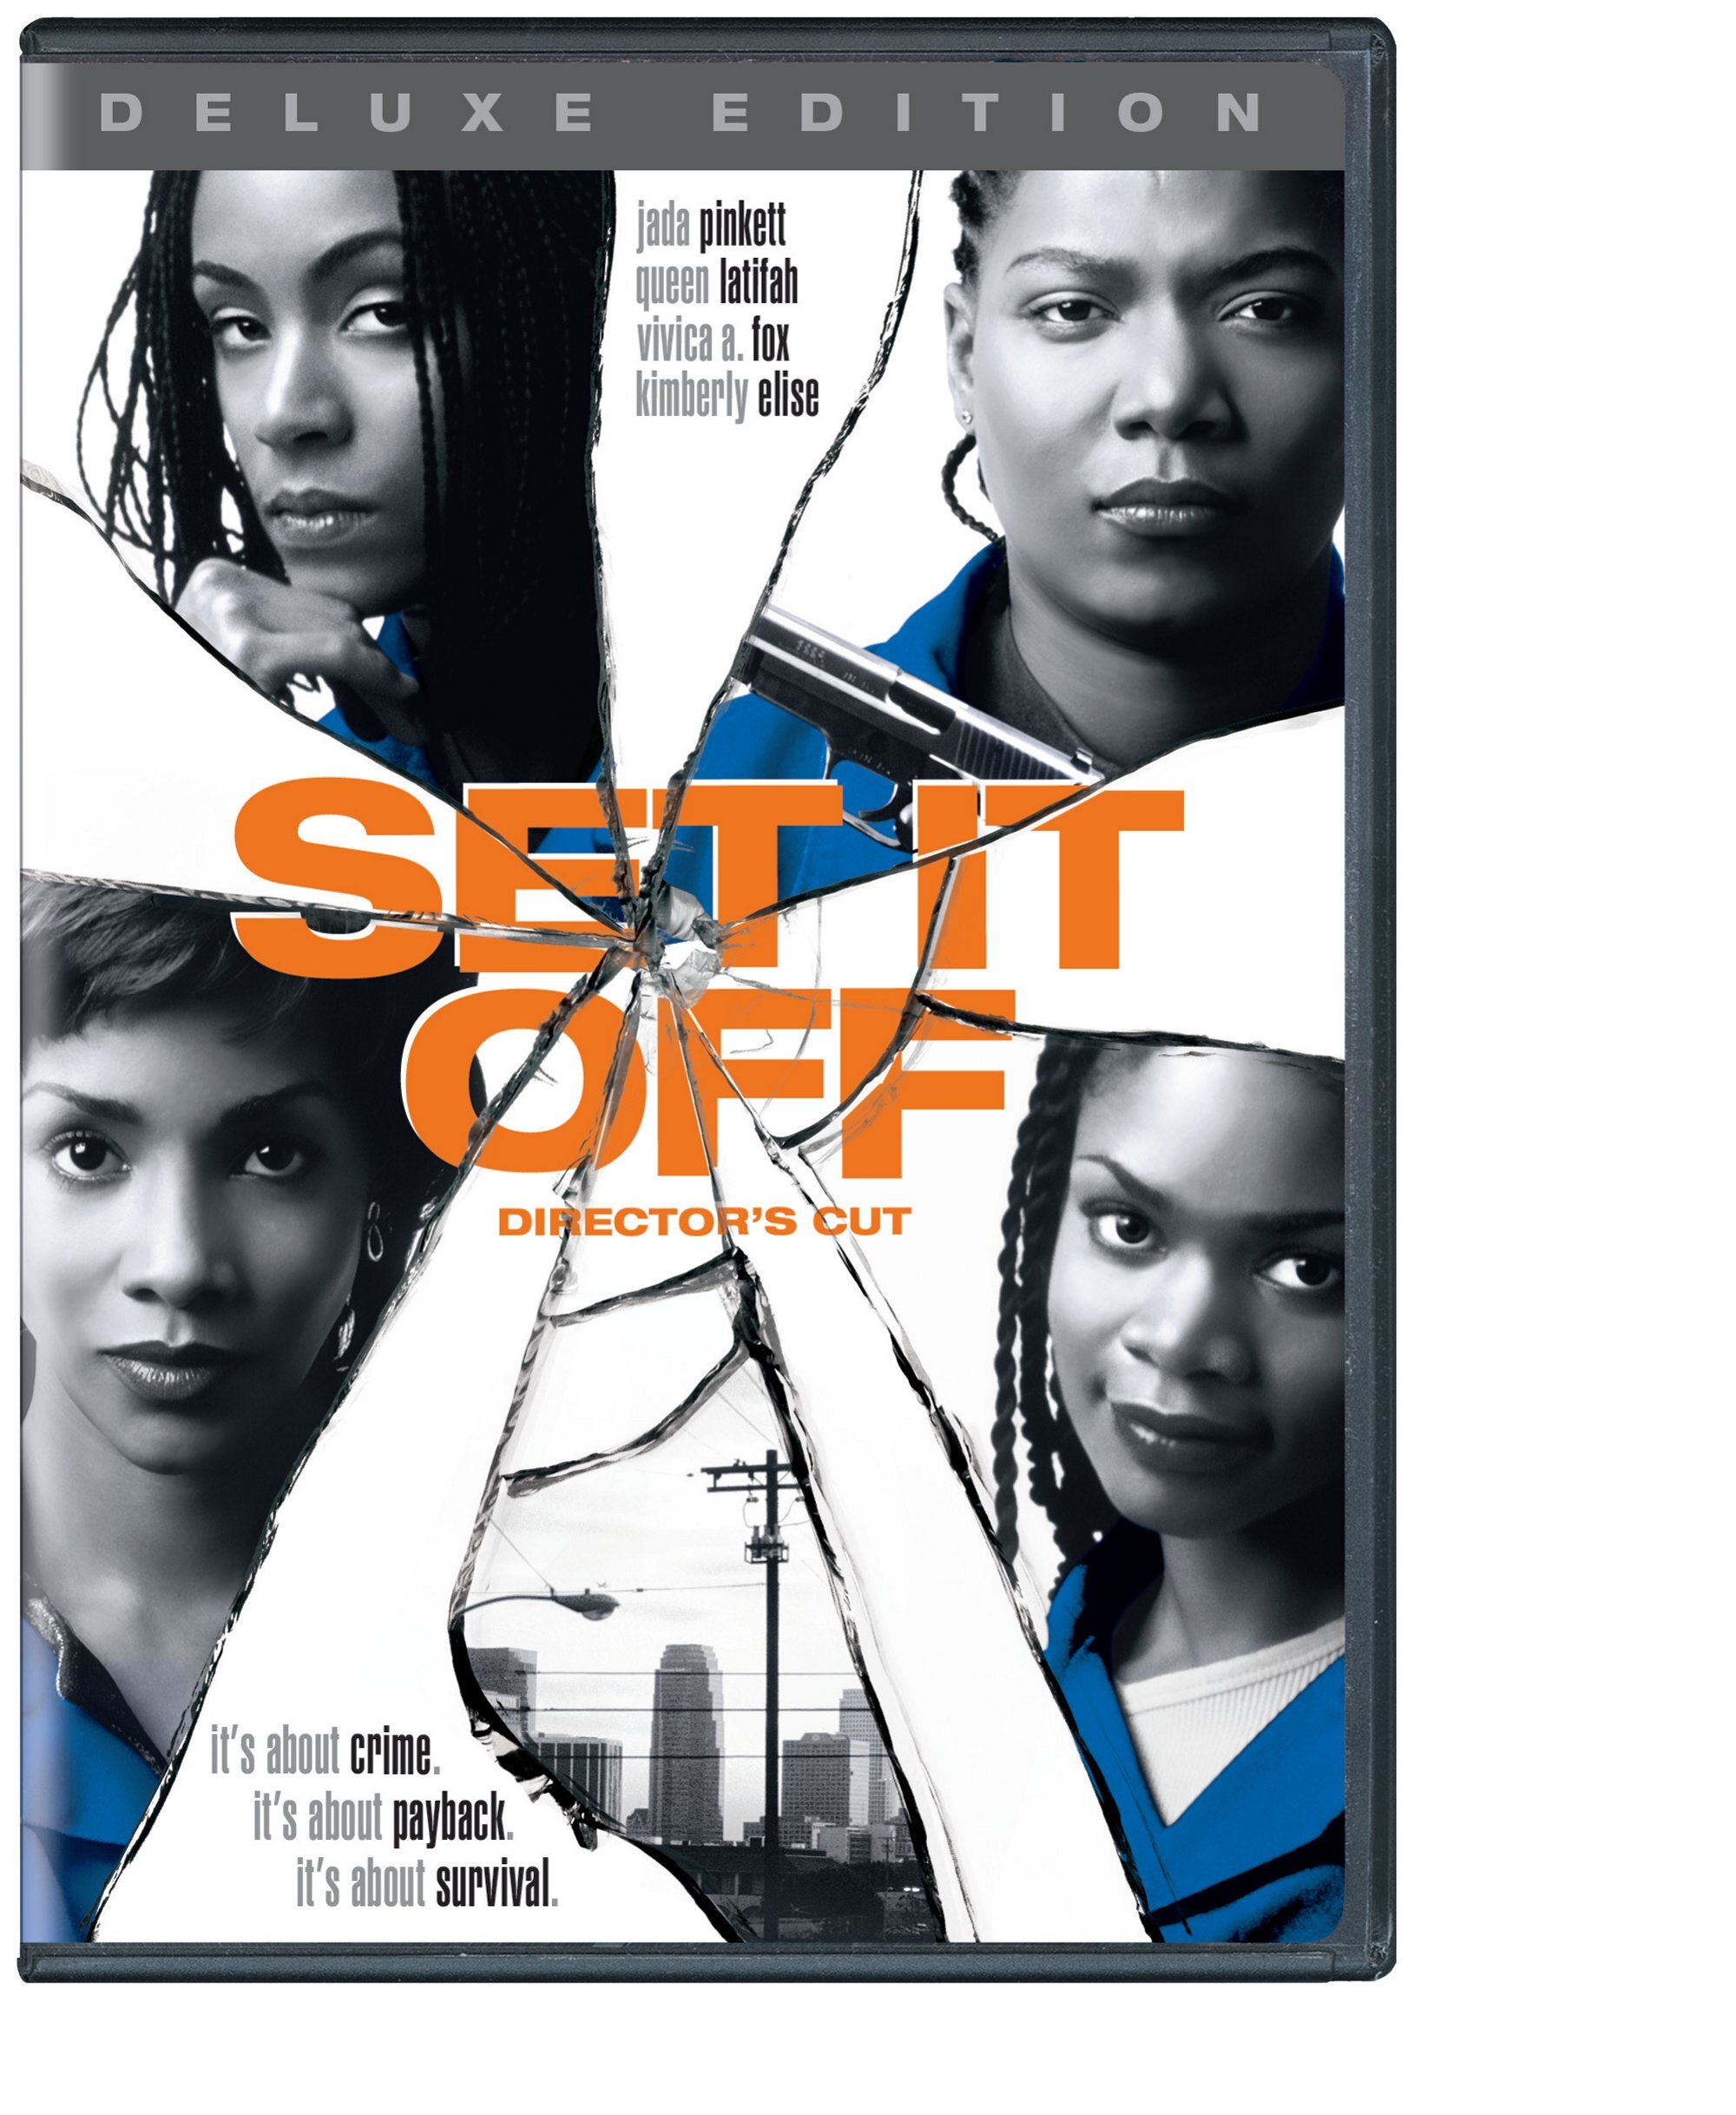 Set It Off (Deluxe Edition) - DVD [ 1996 ]  - Action Movies On DVD - Movies On GRUV